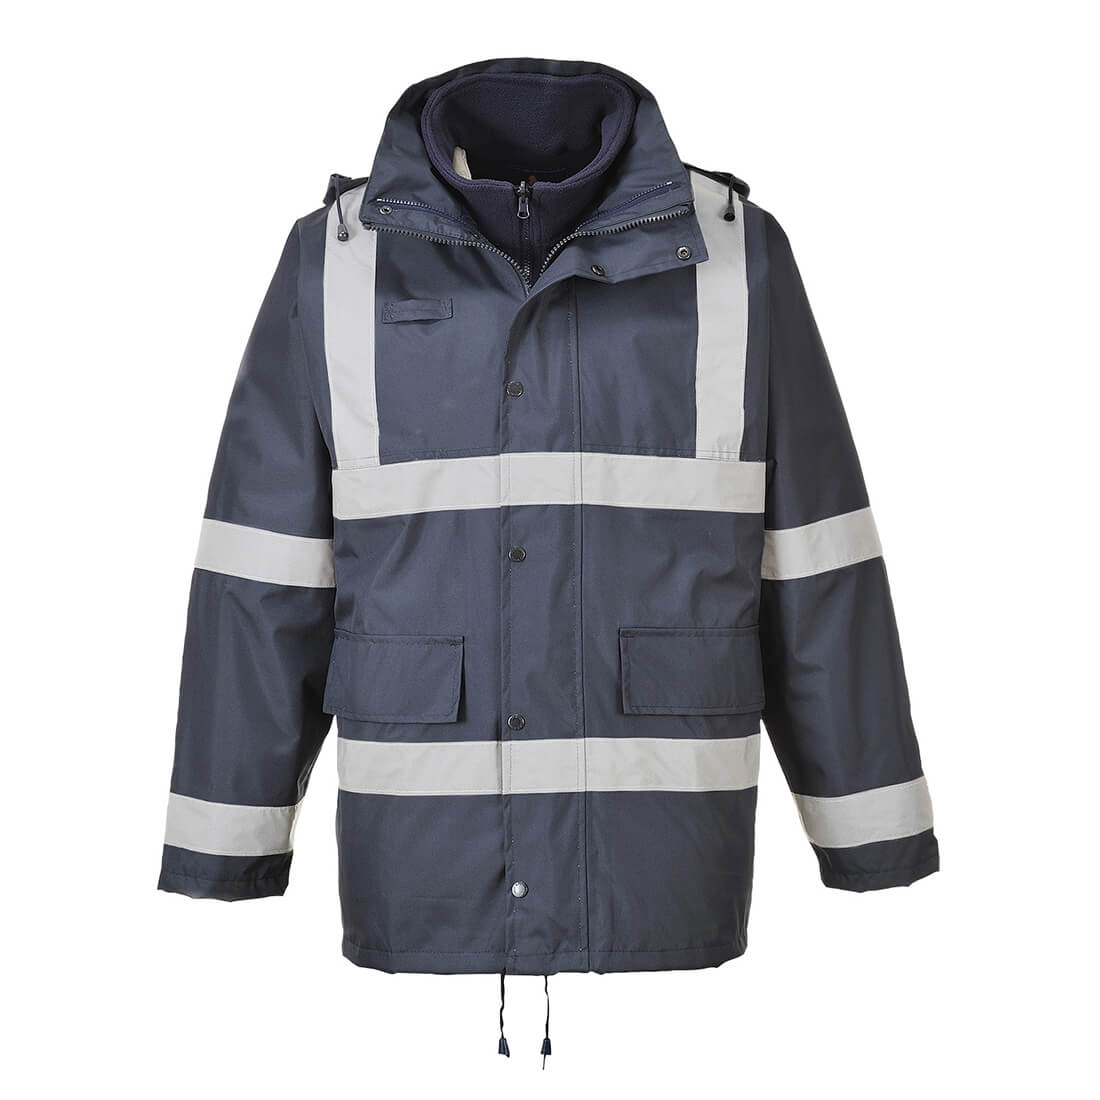 Photo of Portwest S431 Iona 3in1 Traffic Jacket Navy L